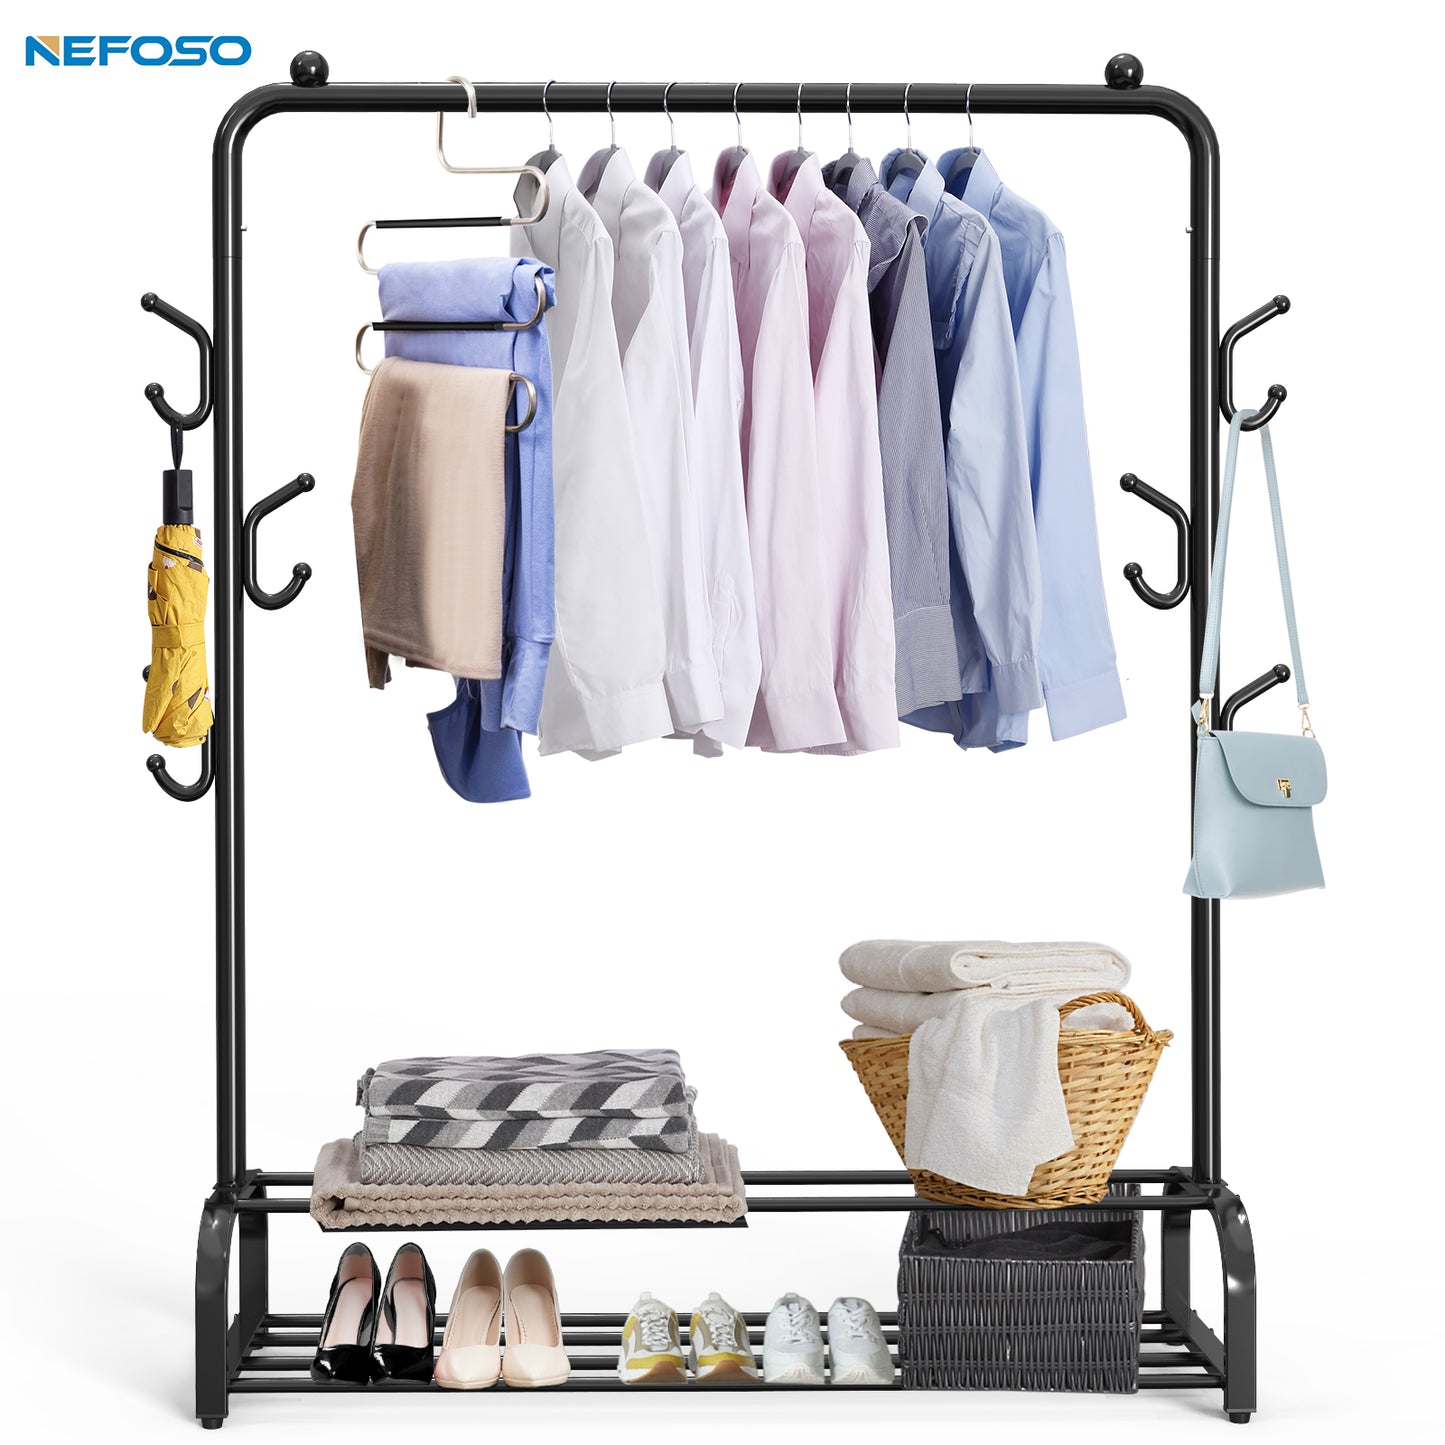 NEFOSO Clothing Garment Rack with 6 Hooks and Double Bottom Shelf Standard Clothes Organizer for Hanging Clothes, Chrome（Black)